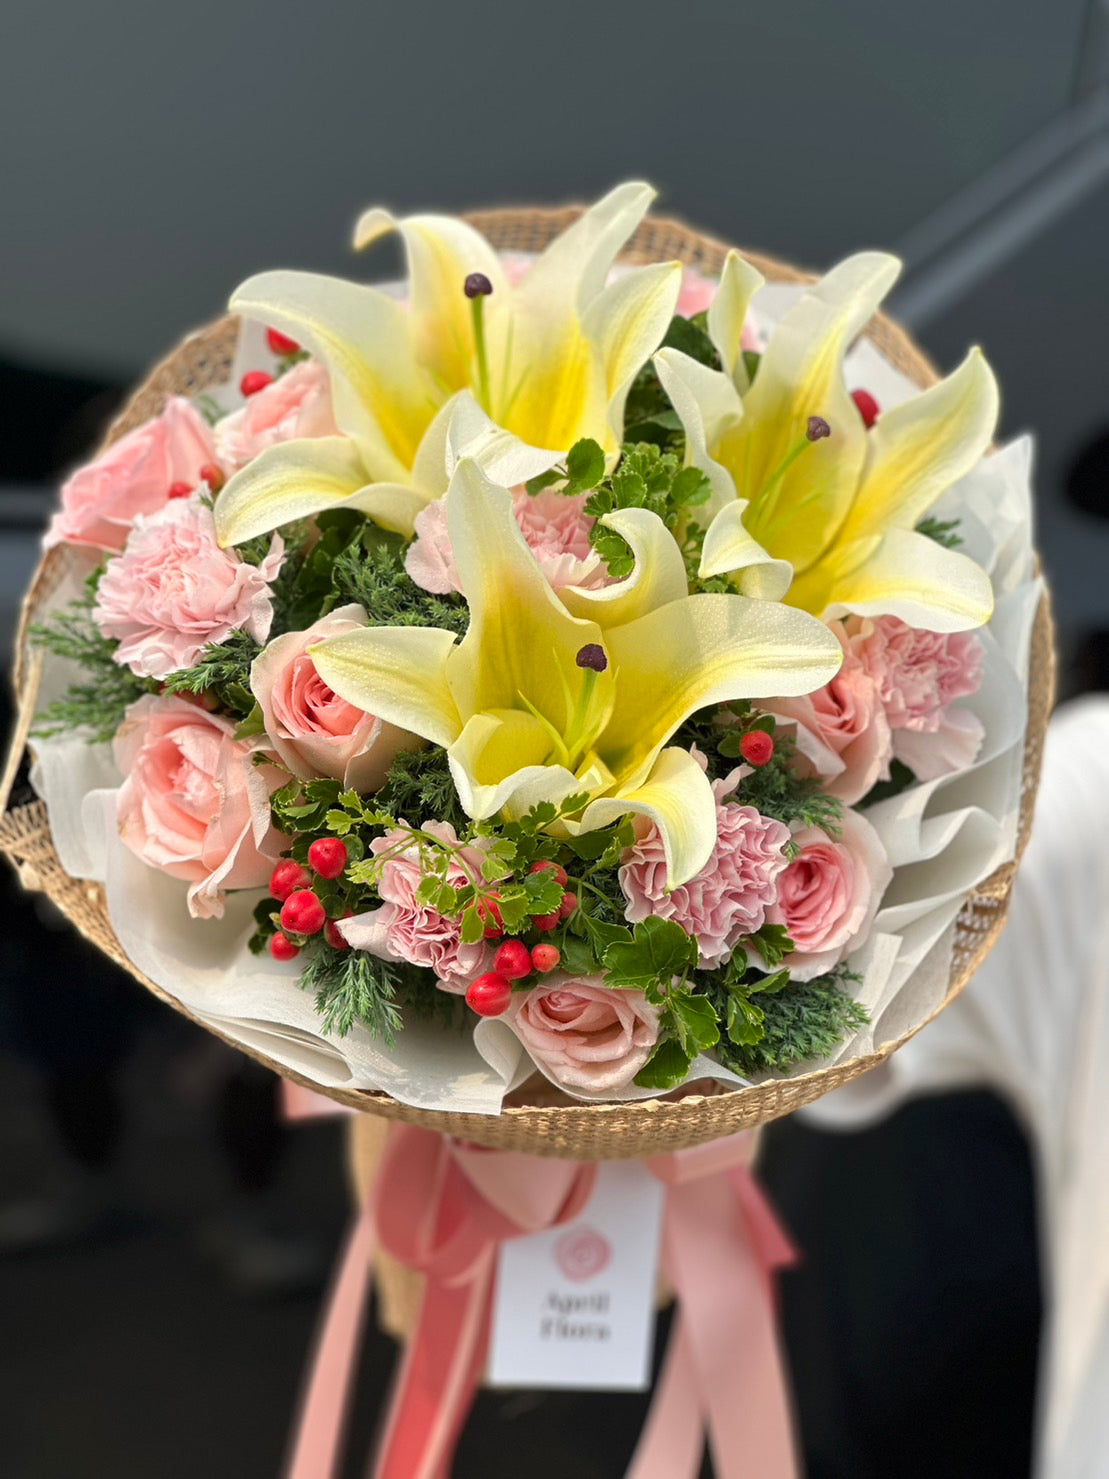 Tender Bouquet Of Lilies And Roses